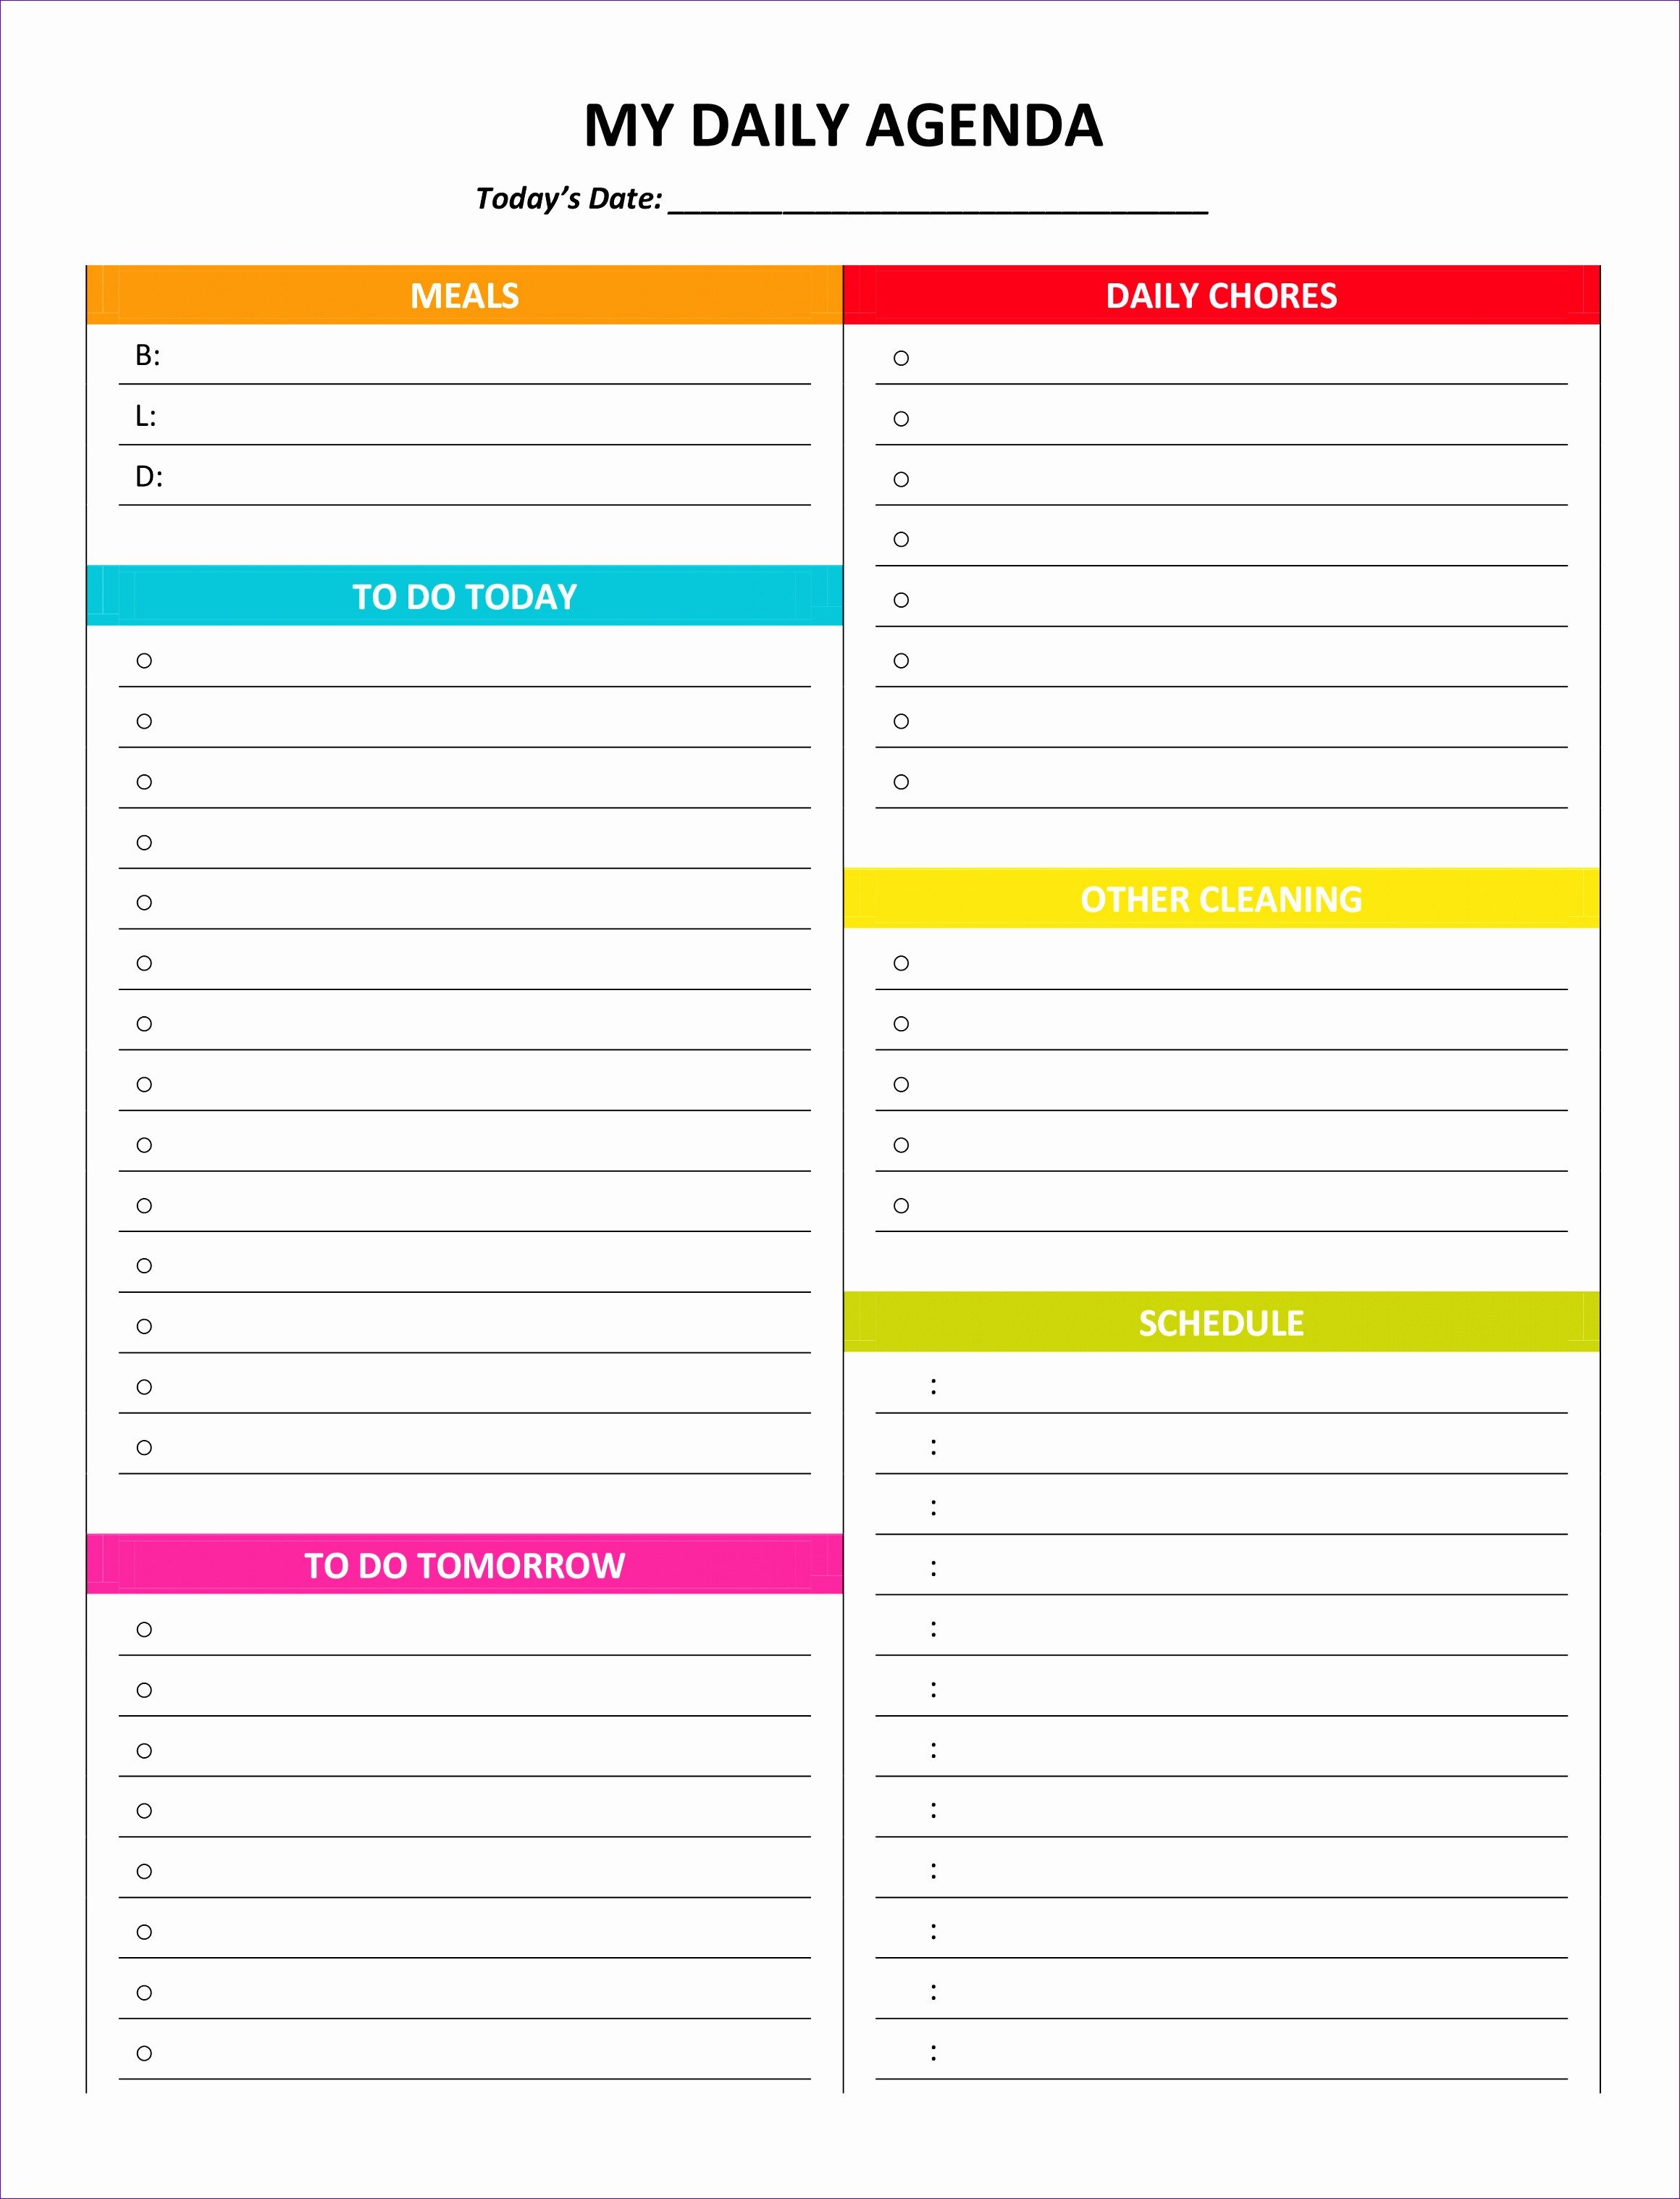 100 Day Plan Template 8 100 Day Plan Template Excel Exceltemplates